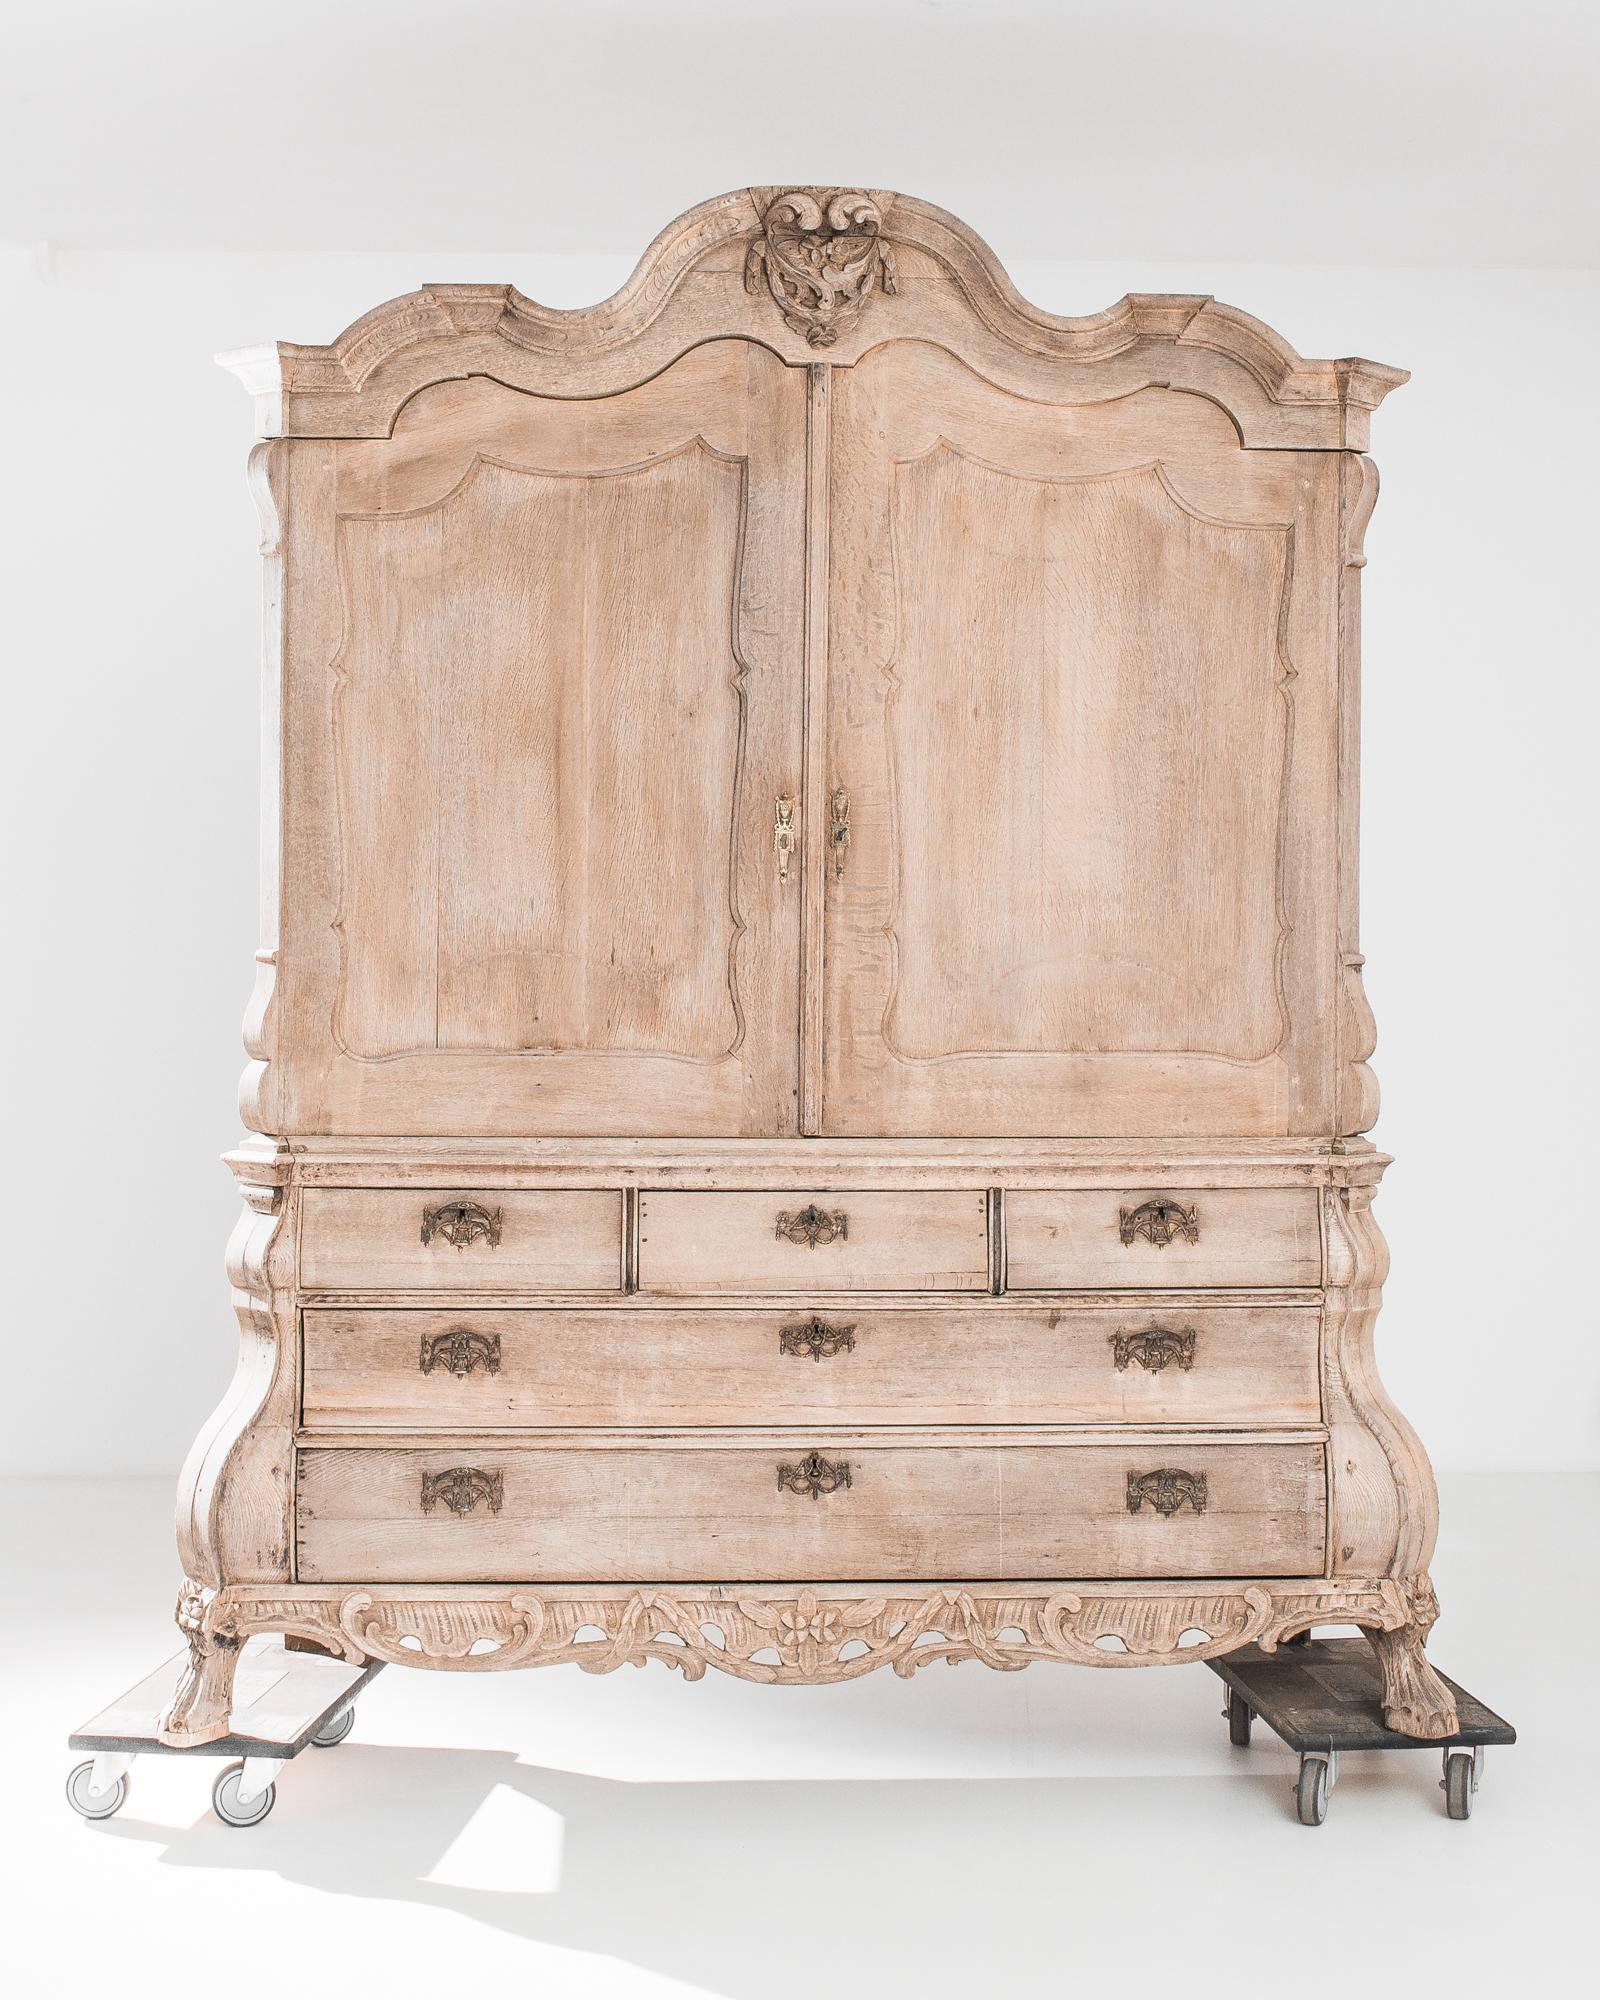 Transport your living space to the refined elegance of the 1780s with the Dutch Bleached Oak Cabinet. Its luminous light oak finish infuses a timeless charm, while the two main doors open to reveal a capacious interior, unadorned with shelves,